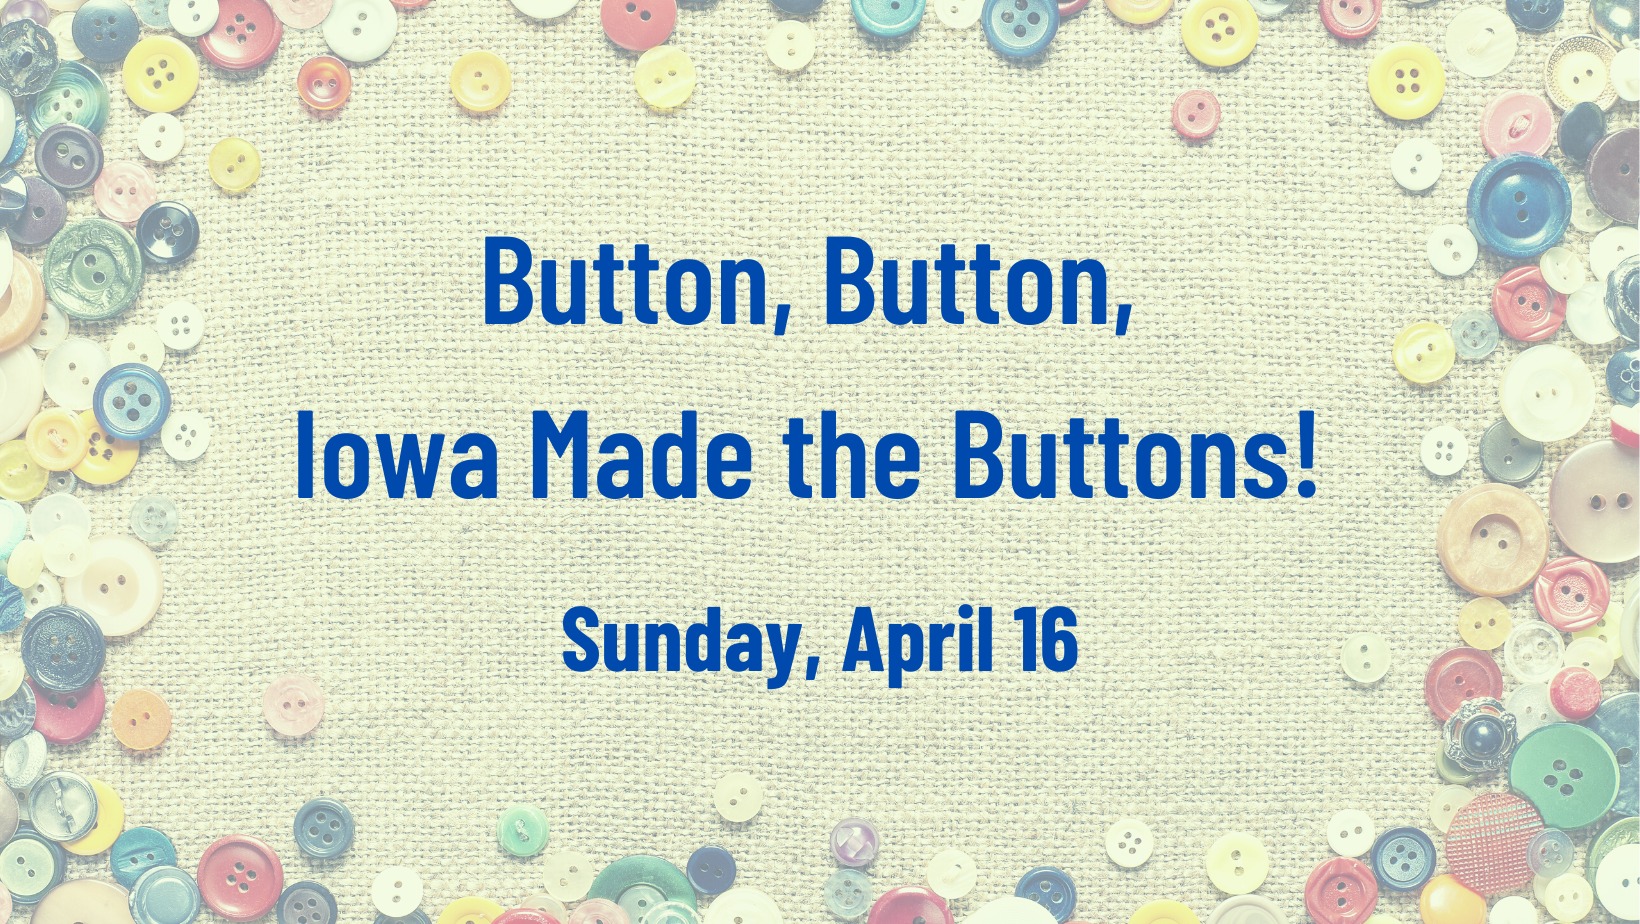 Iowa Made the Buttons